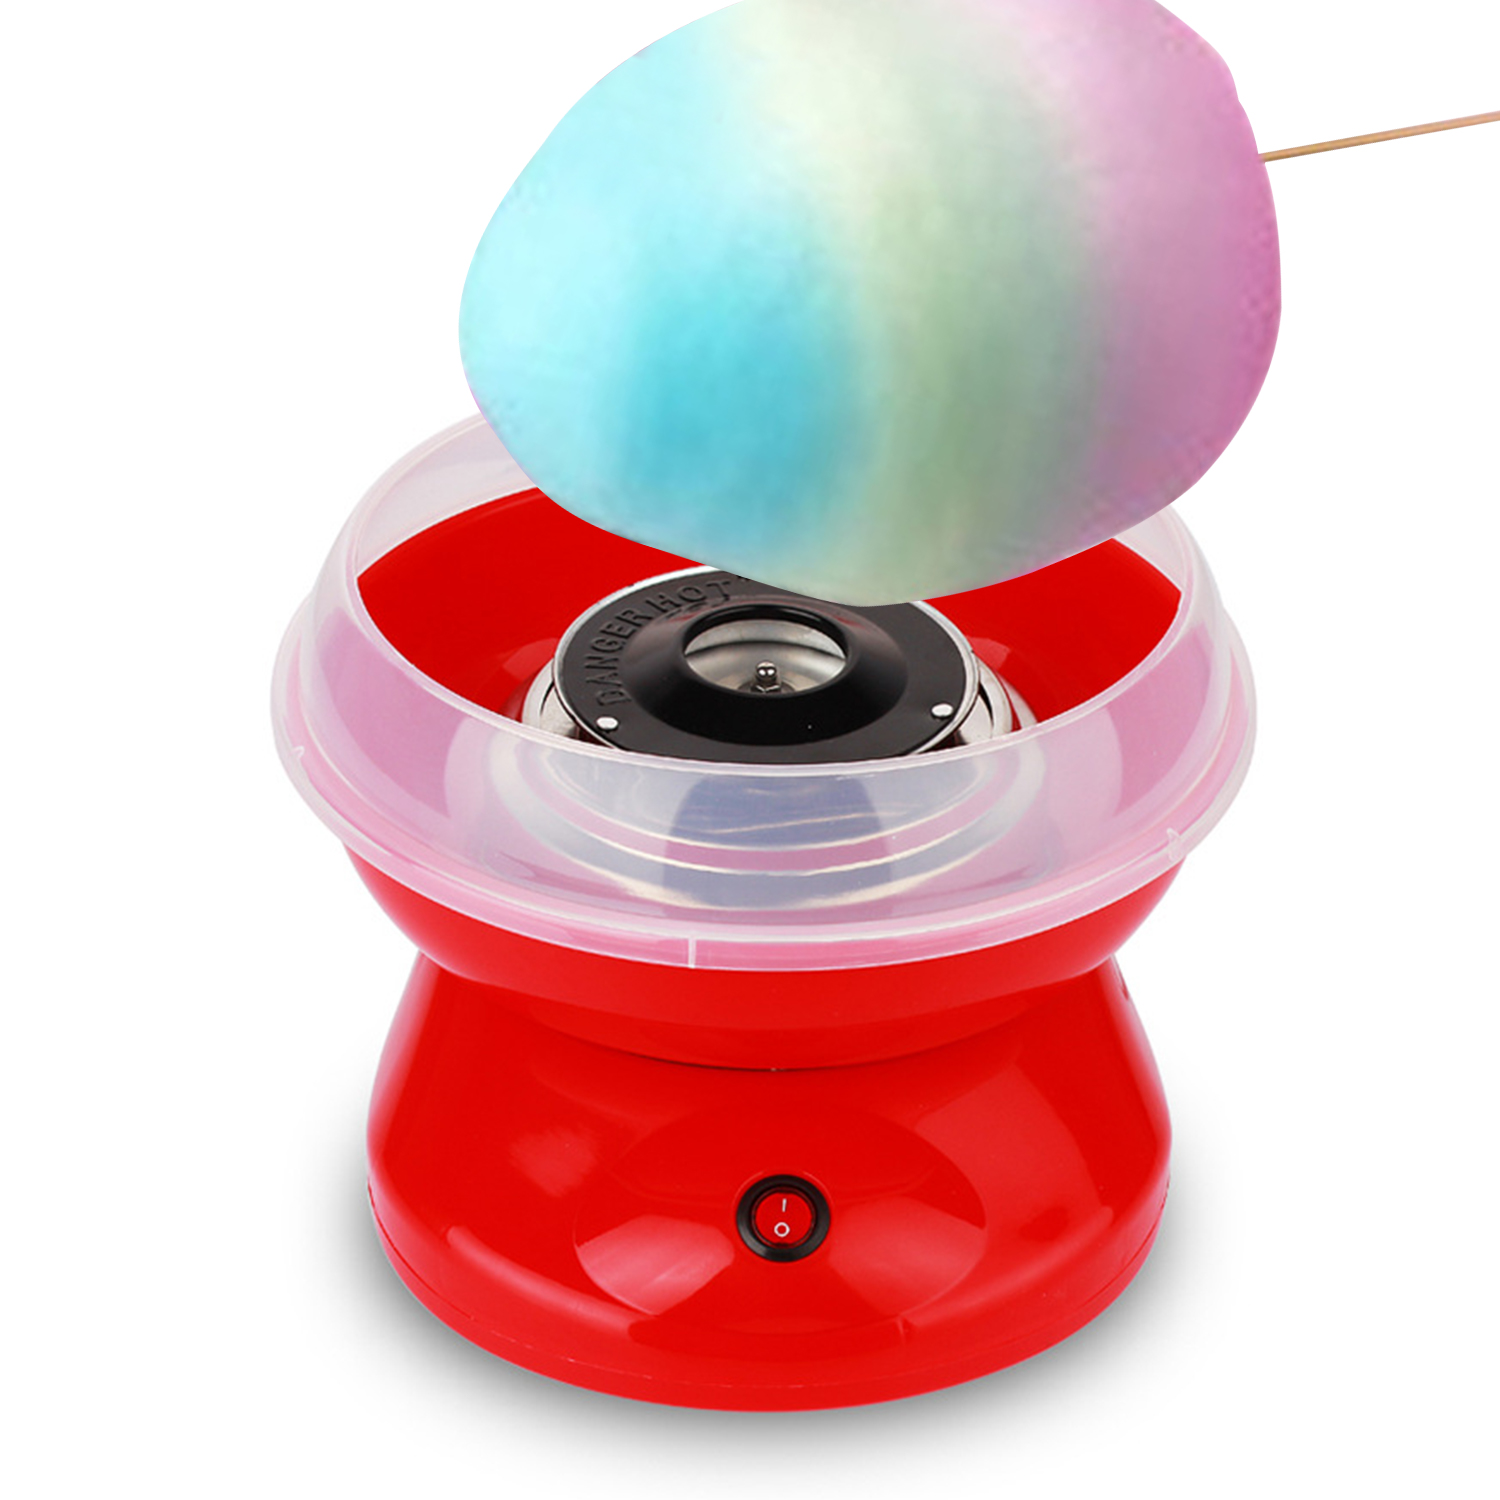 Cotton Candy Machine Cotton Candy Maker Fashion Mini Cotton Candy Machine,Sugar Floss Maker,DIY Marshmallow Machine,Great for Home Party Movie Theater and Birthday Gift